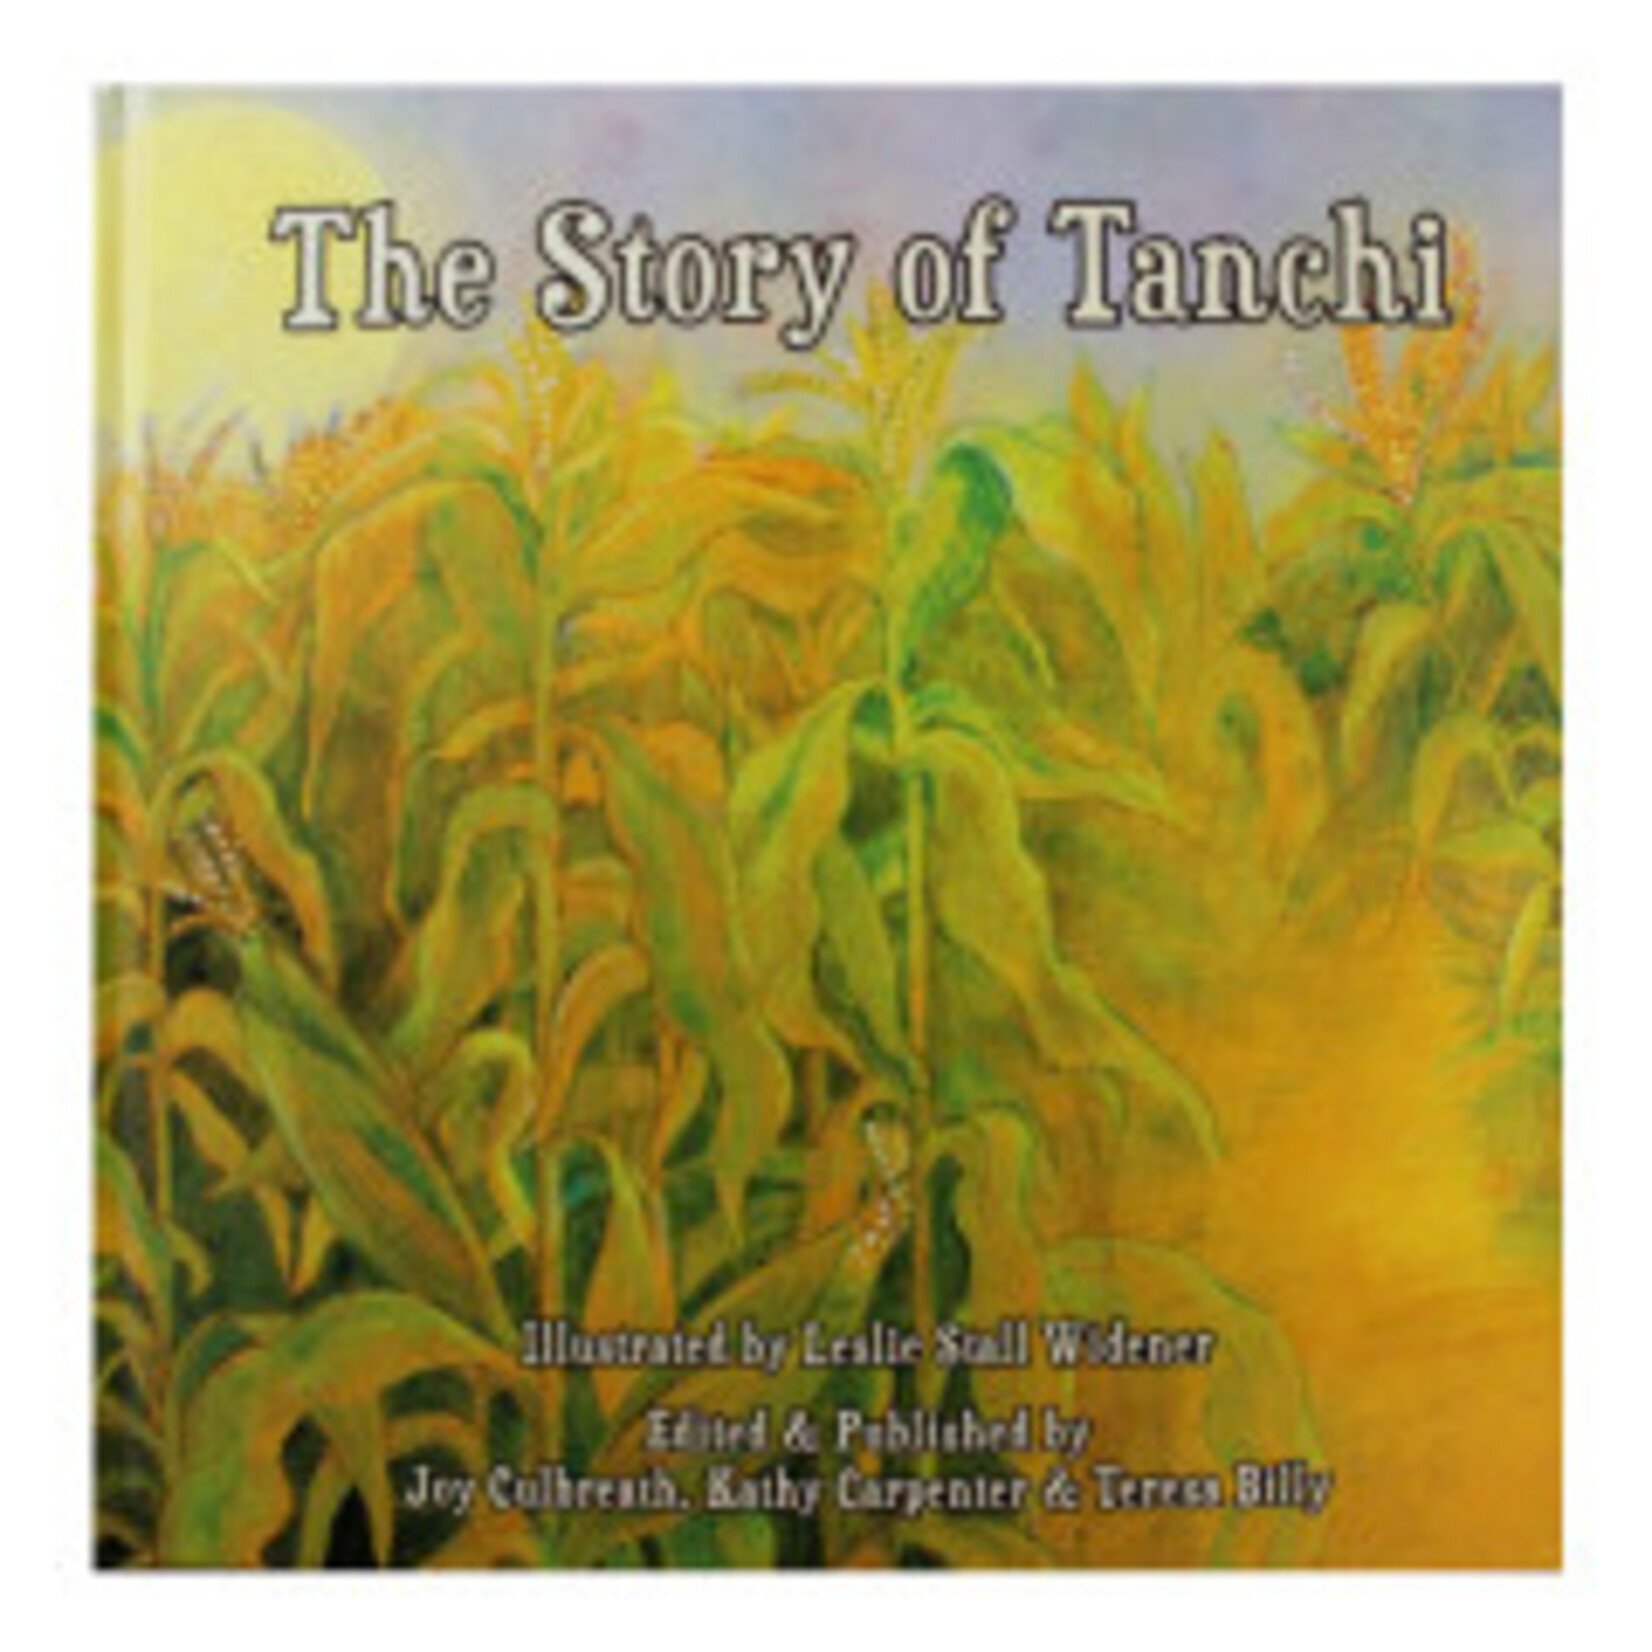 The Story of Tanchi